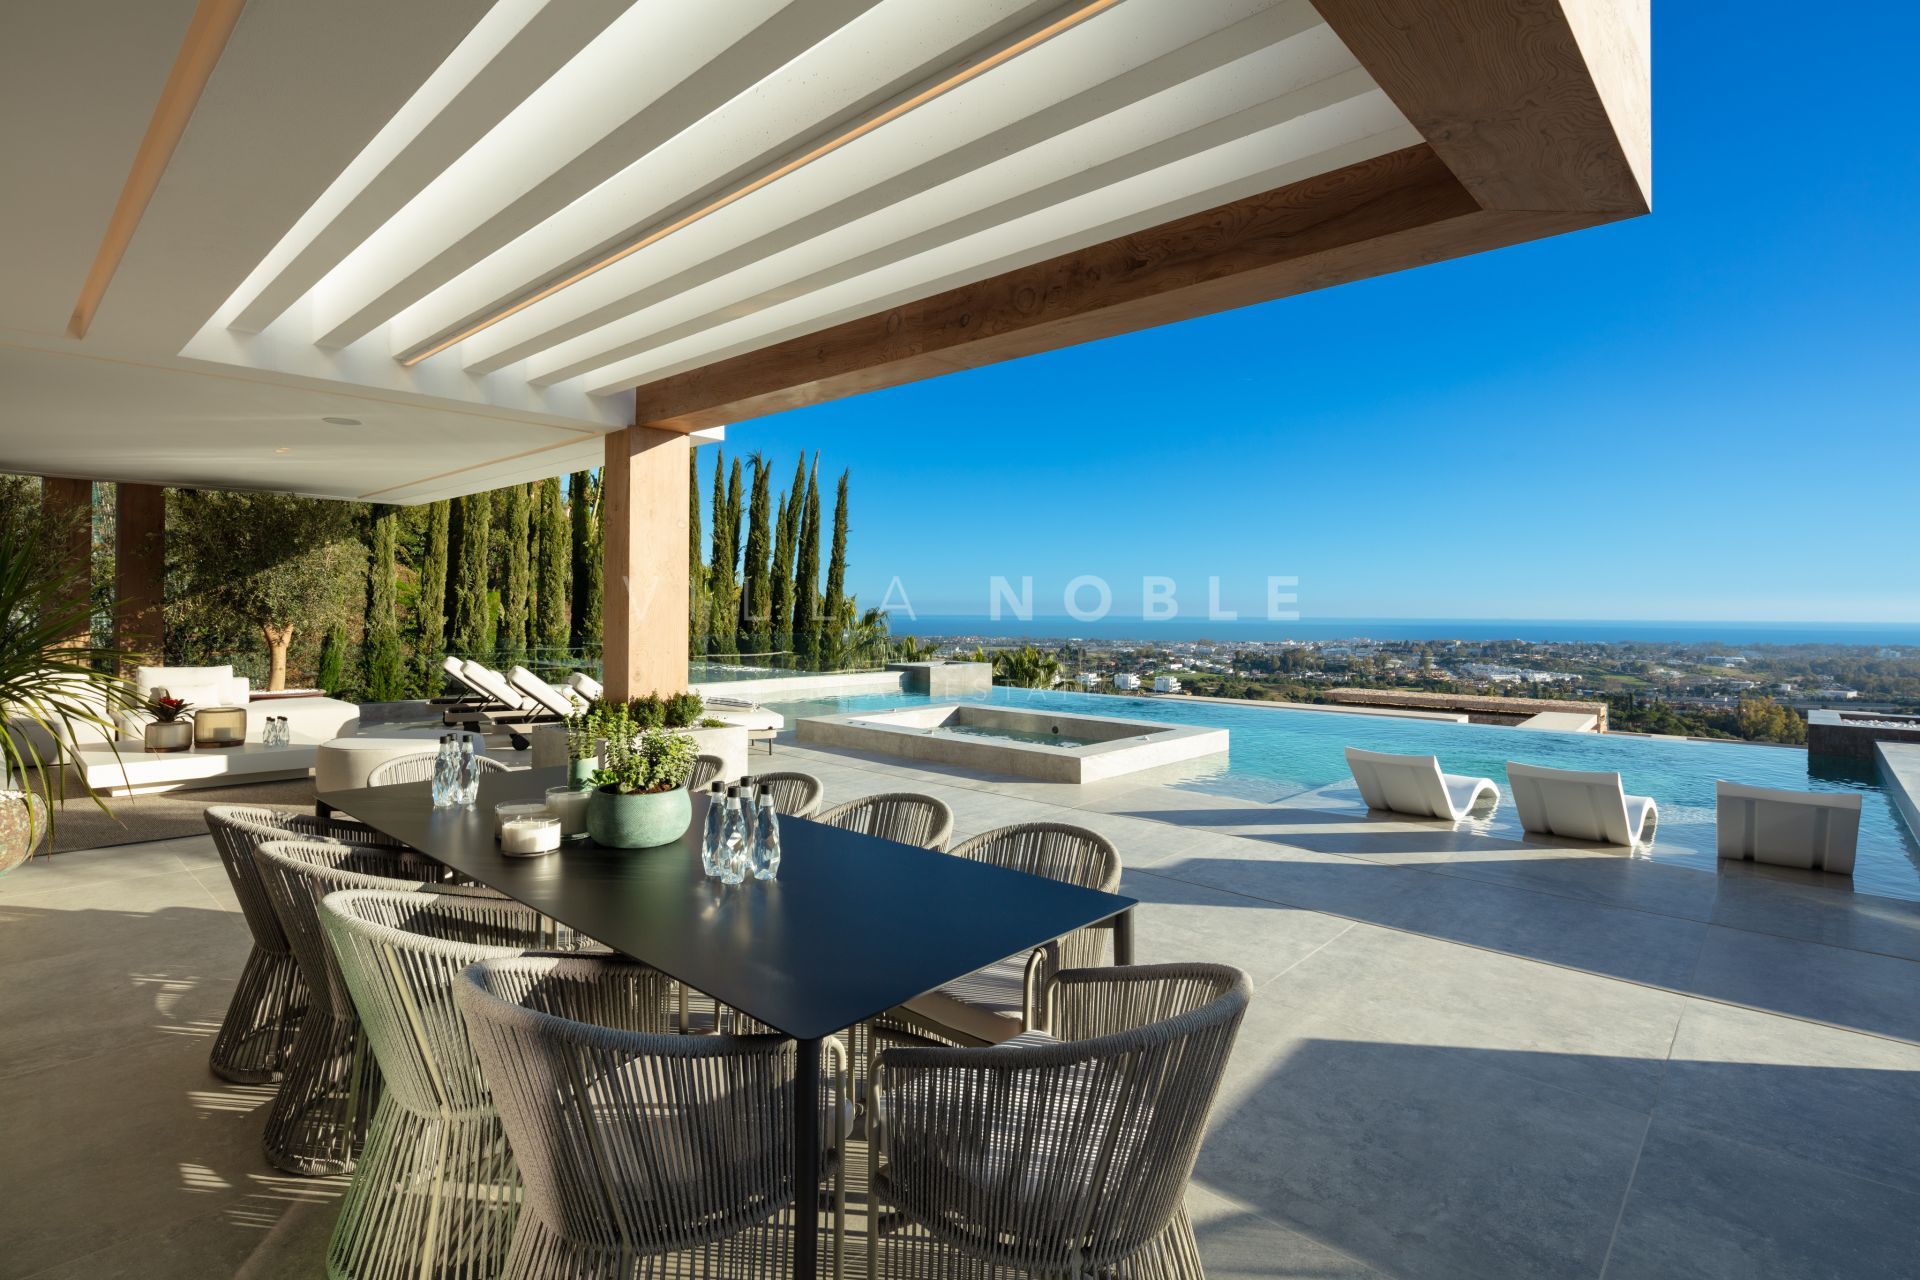 Brand new contemporary villa located in the exclusive gated community of The Hills, in La Quinta.